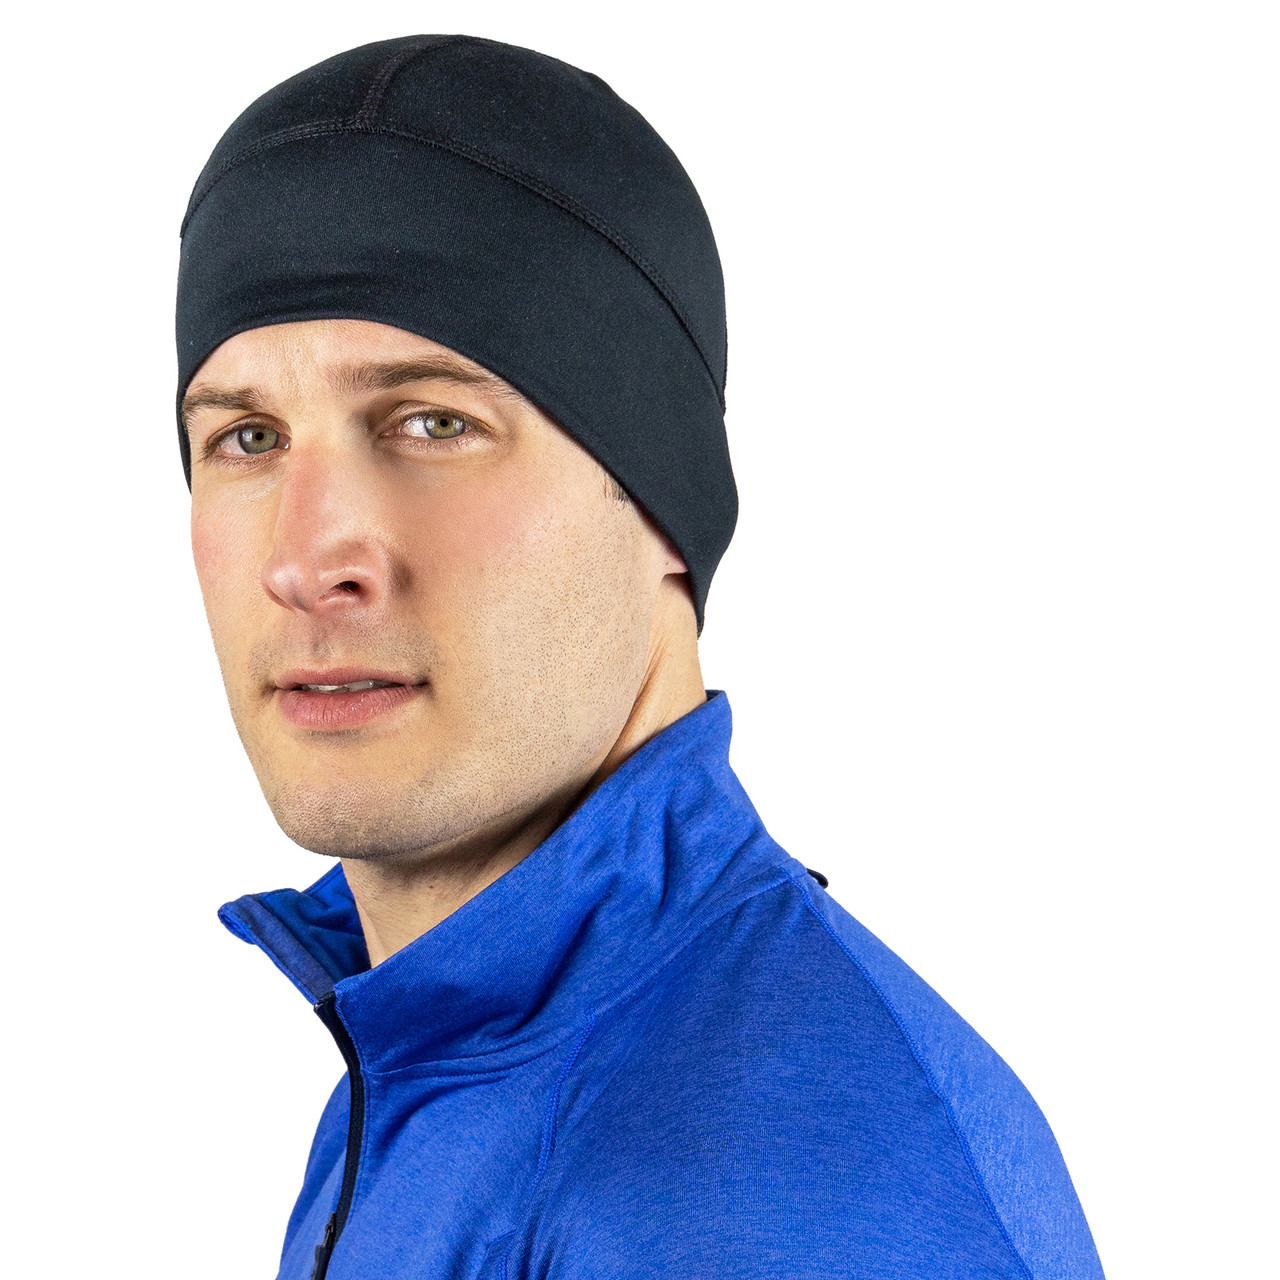 Runners Hats for Men Women, Thin Winter Helmet Liner, Moisture Wicking  Cycling Skull Cap, Cold Weather Workout Beanie